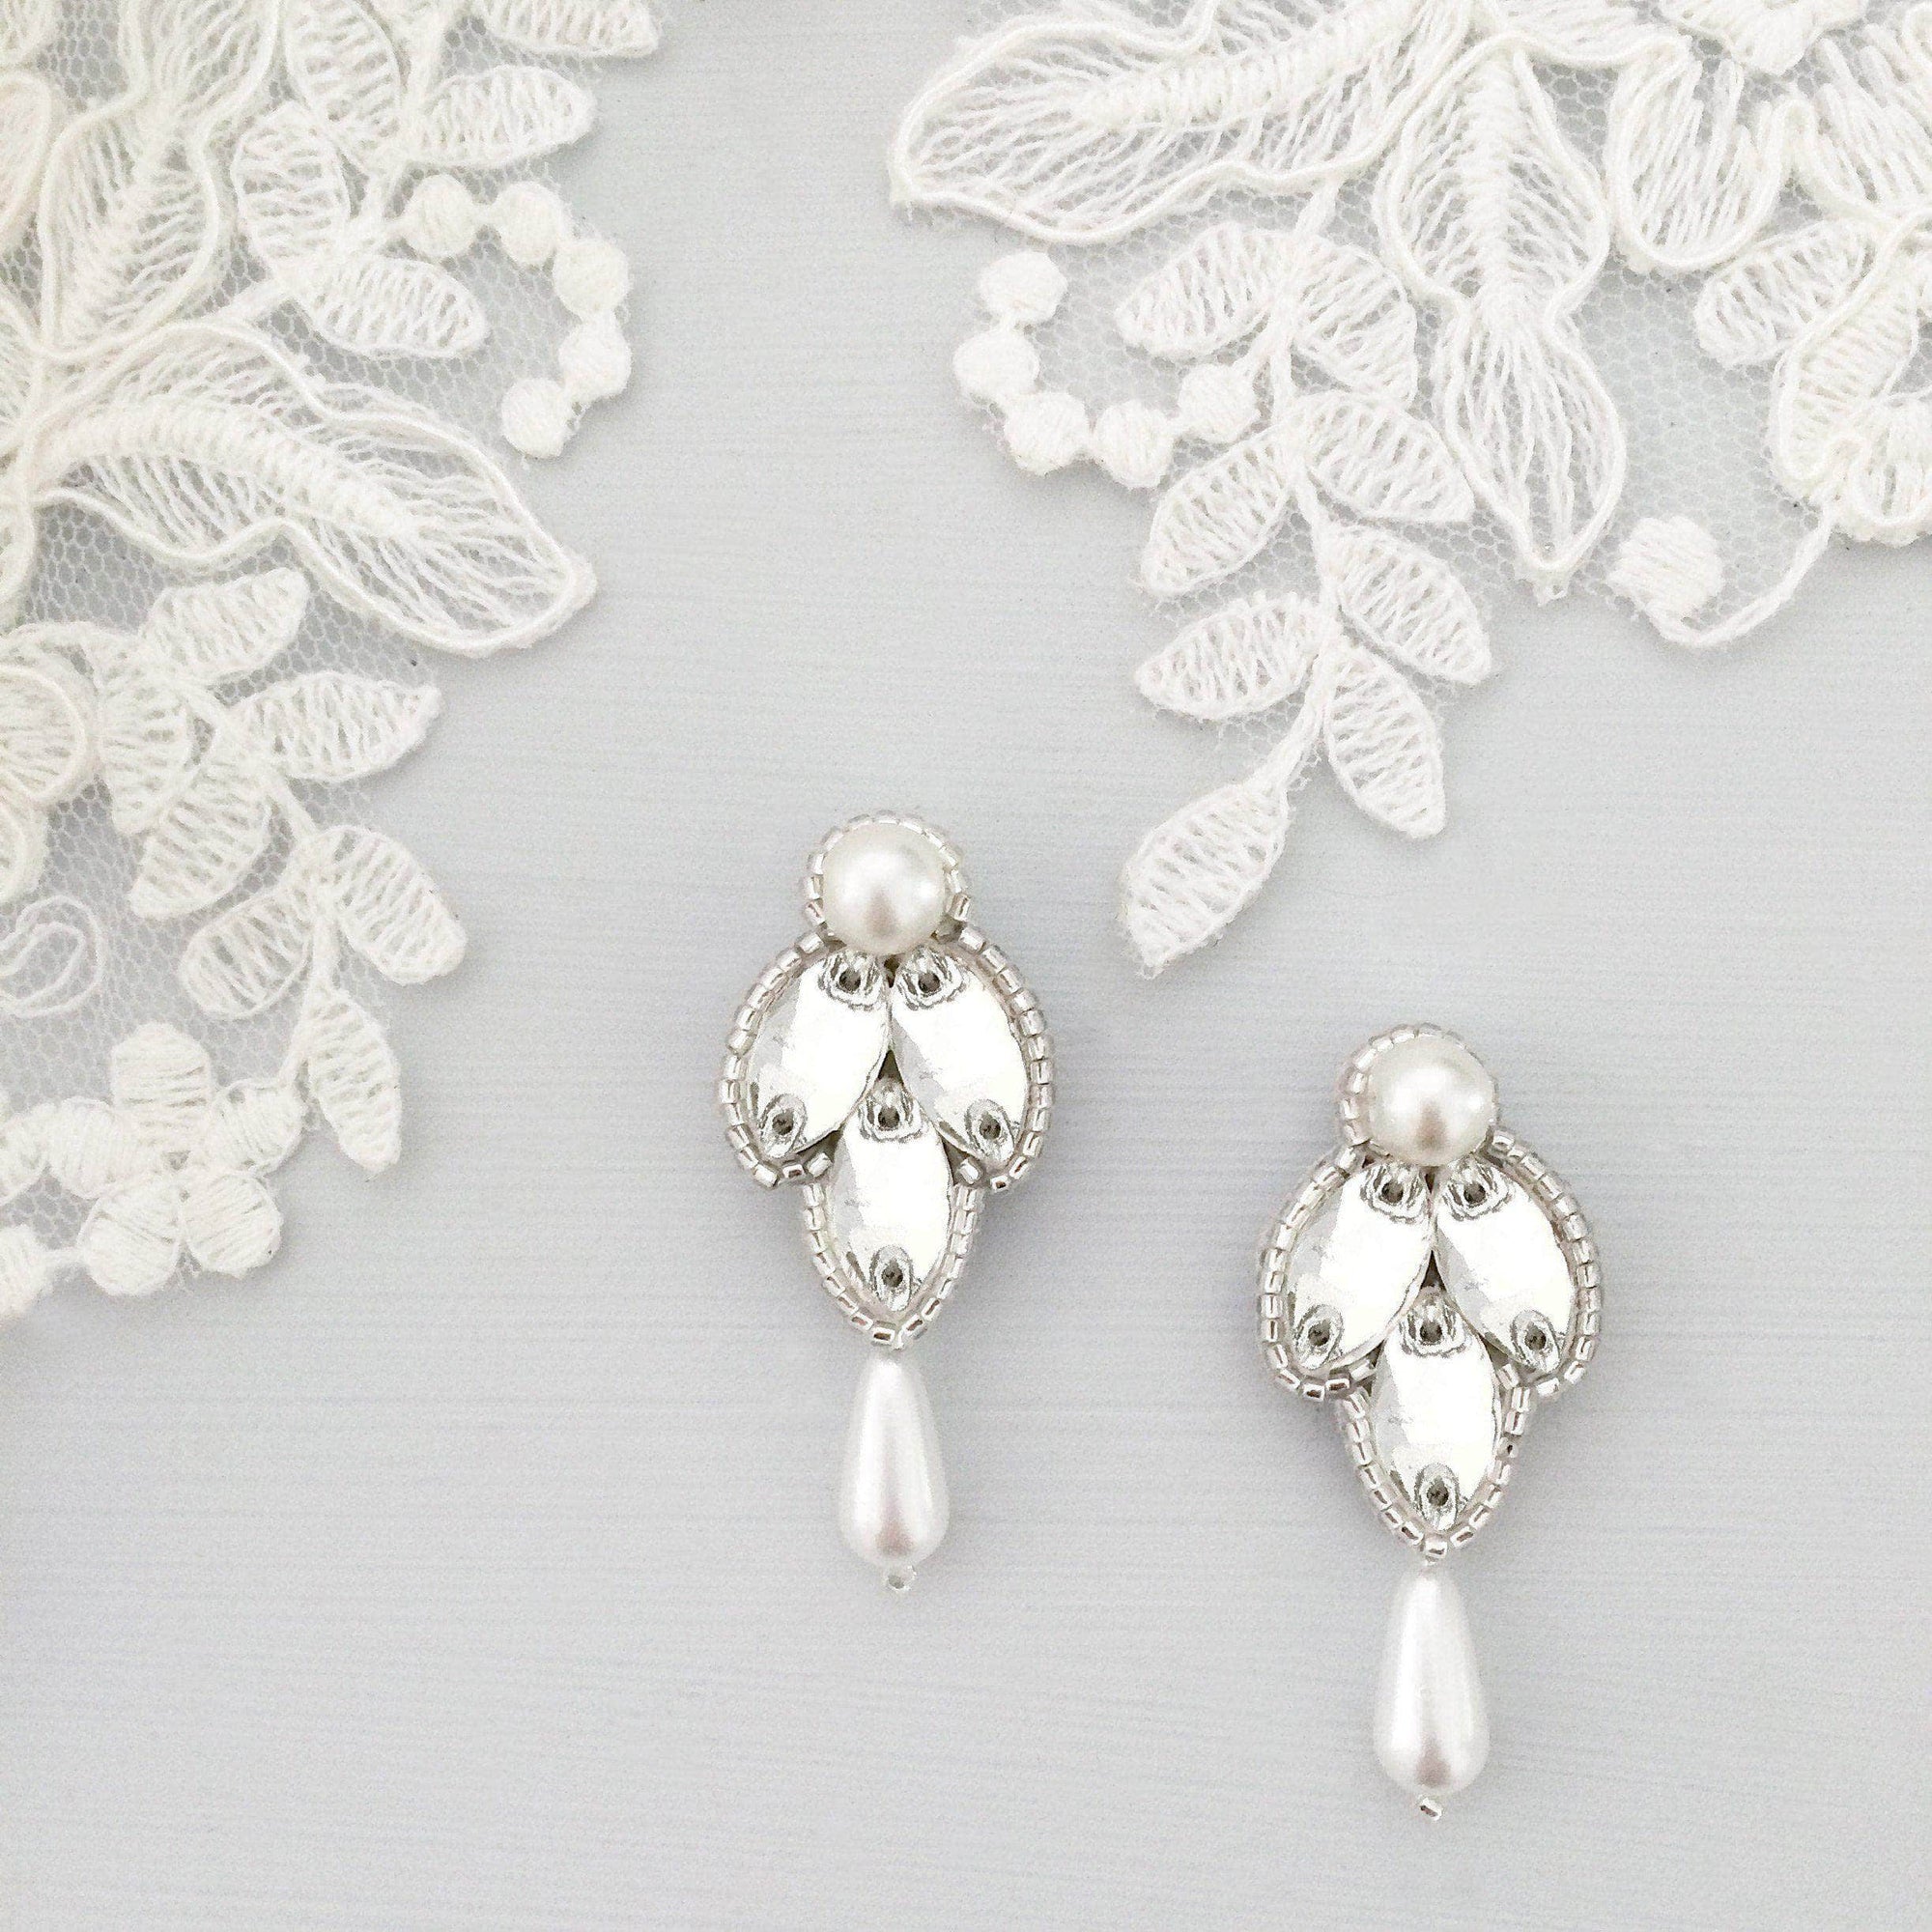 Wedding Earring Silver and pearl Wedding drop earrings silver, pearl & crystal - 'Clementine'